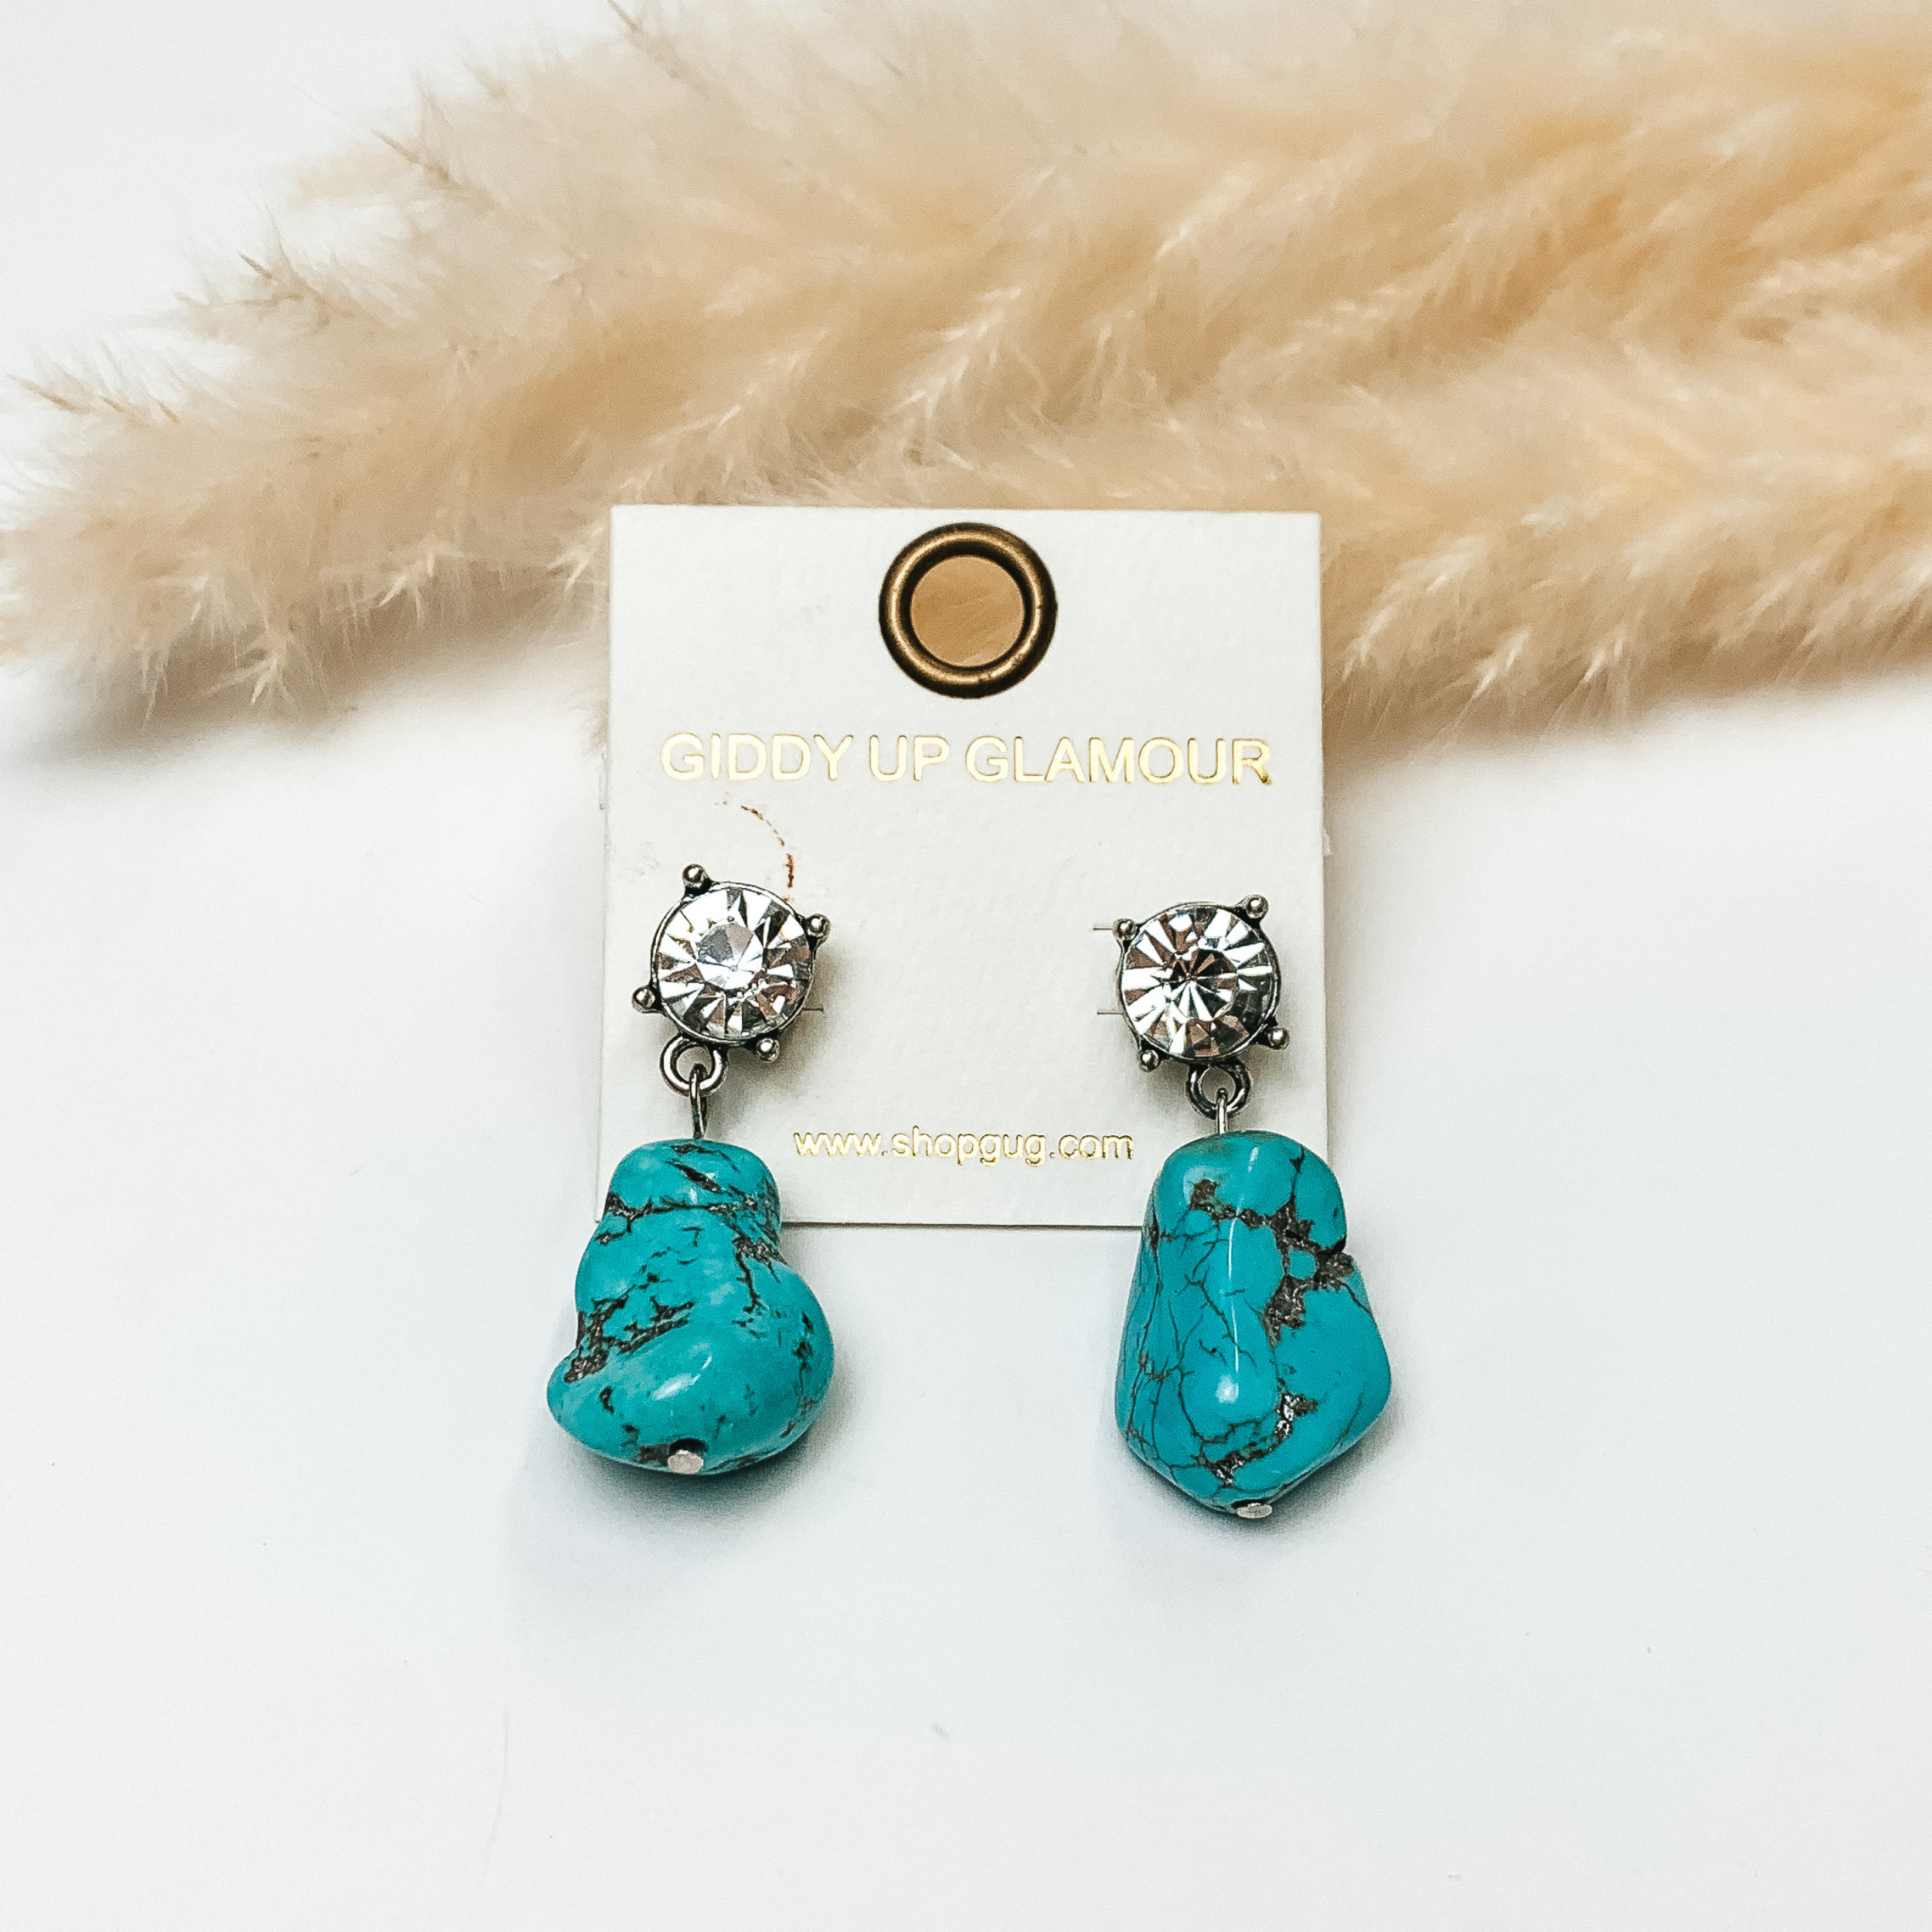 Clear crystal post back earrings with large turquoise stones attached. Earrings are in front of greenery with white background. 